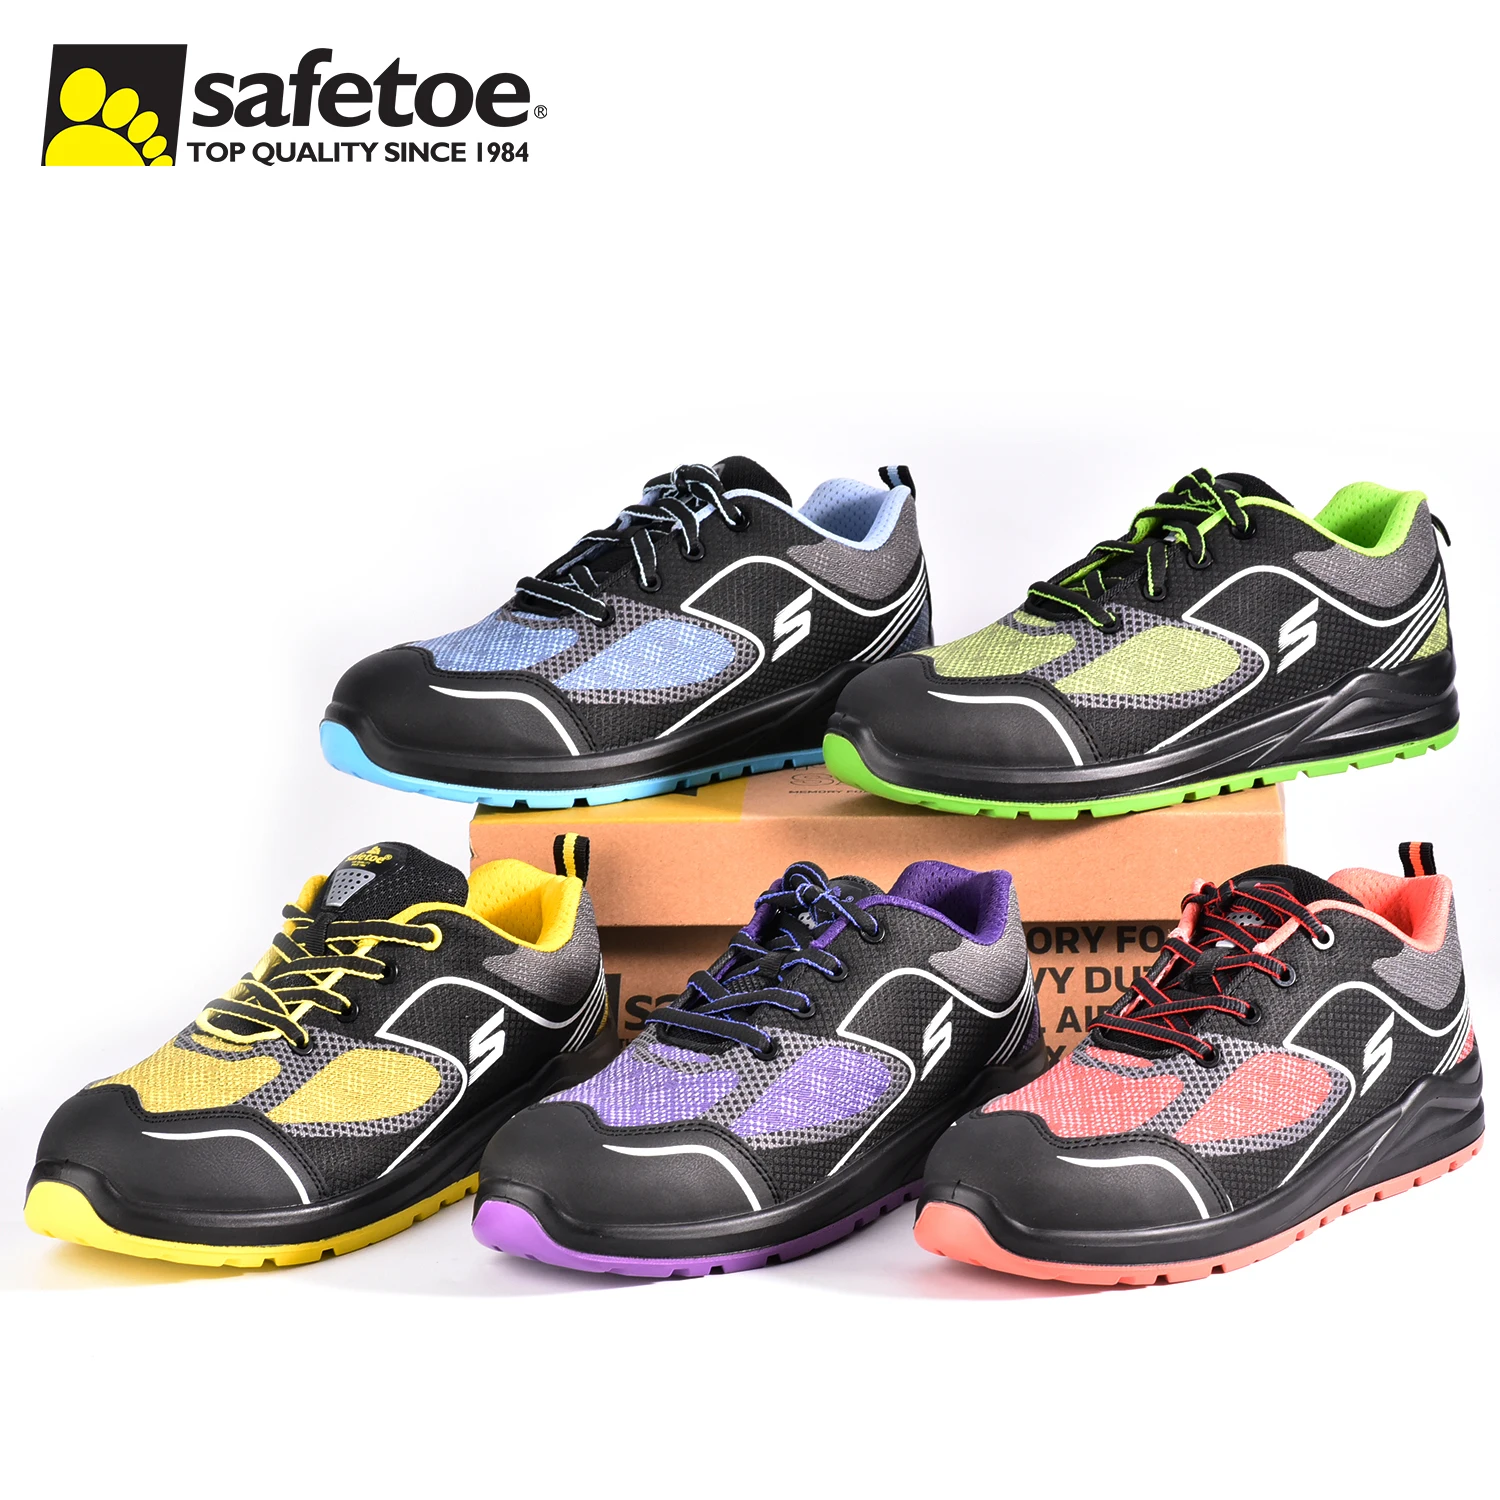 Wholesale Safetoe Toe Trainer Sport Safety Shoes Men & Women Weight Work Sneaker Jogger Safety Boot From m.alibaba.com